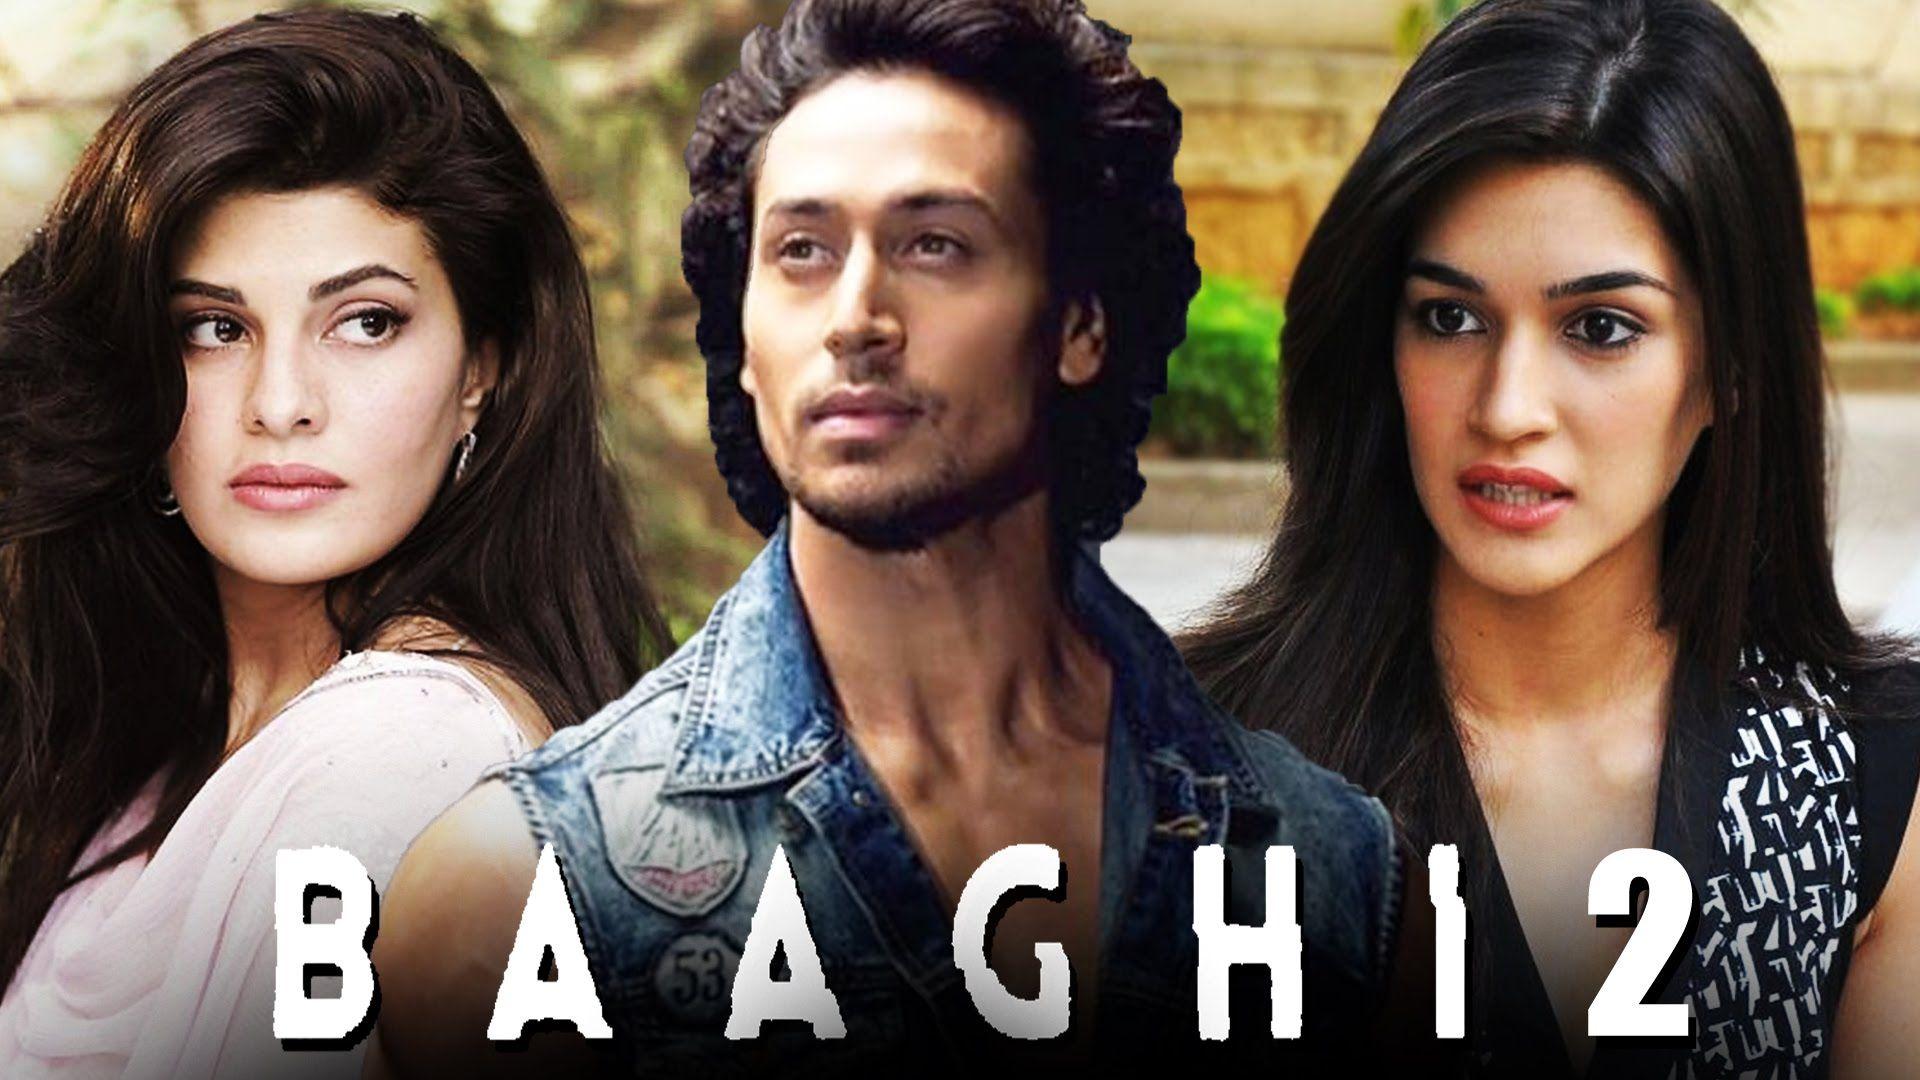 Baaghi 2 Wallpapers - Wallpaper Cave